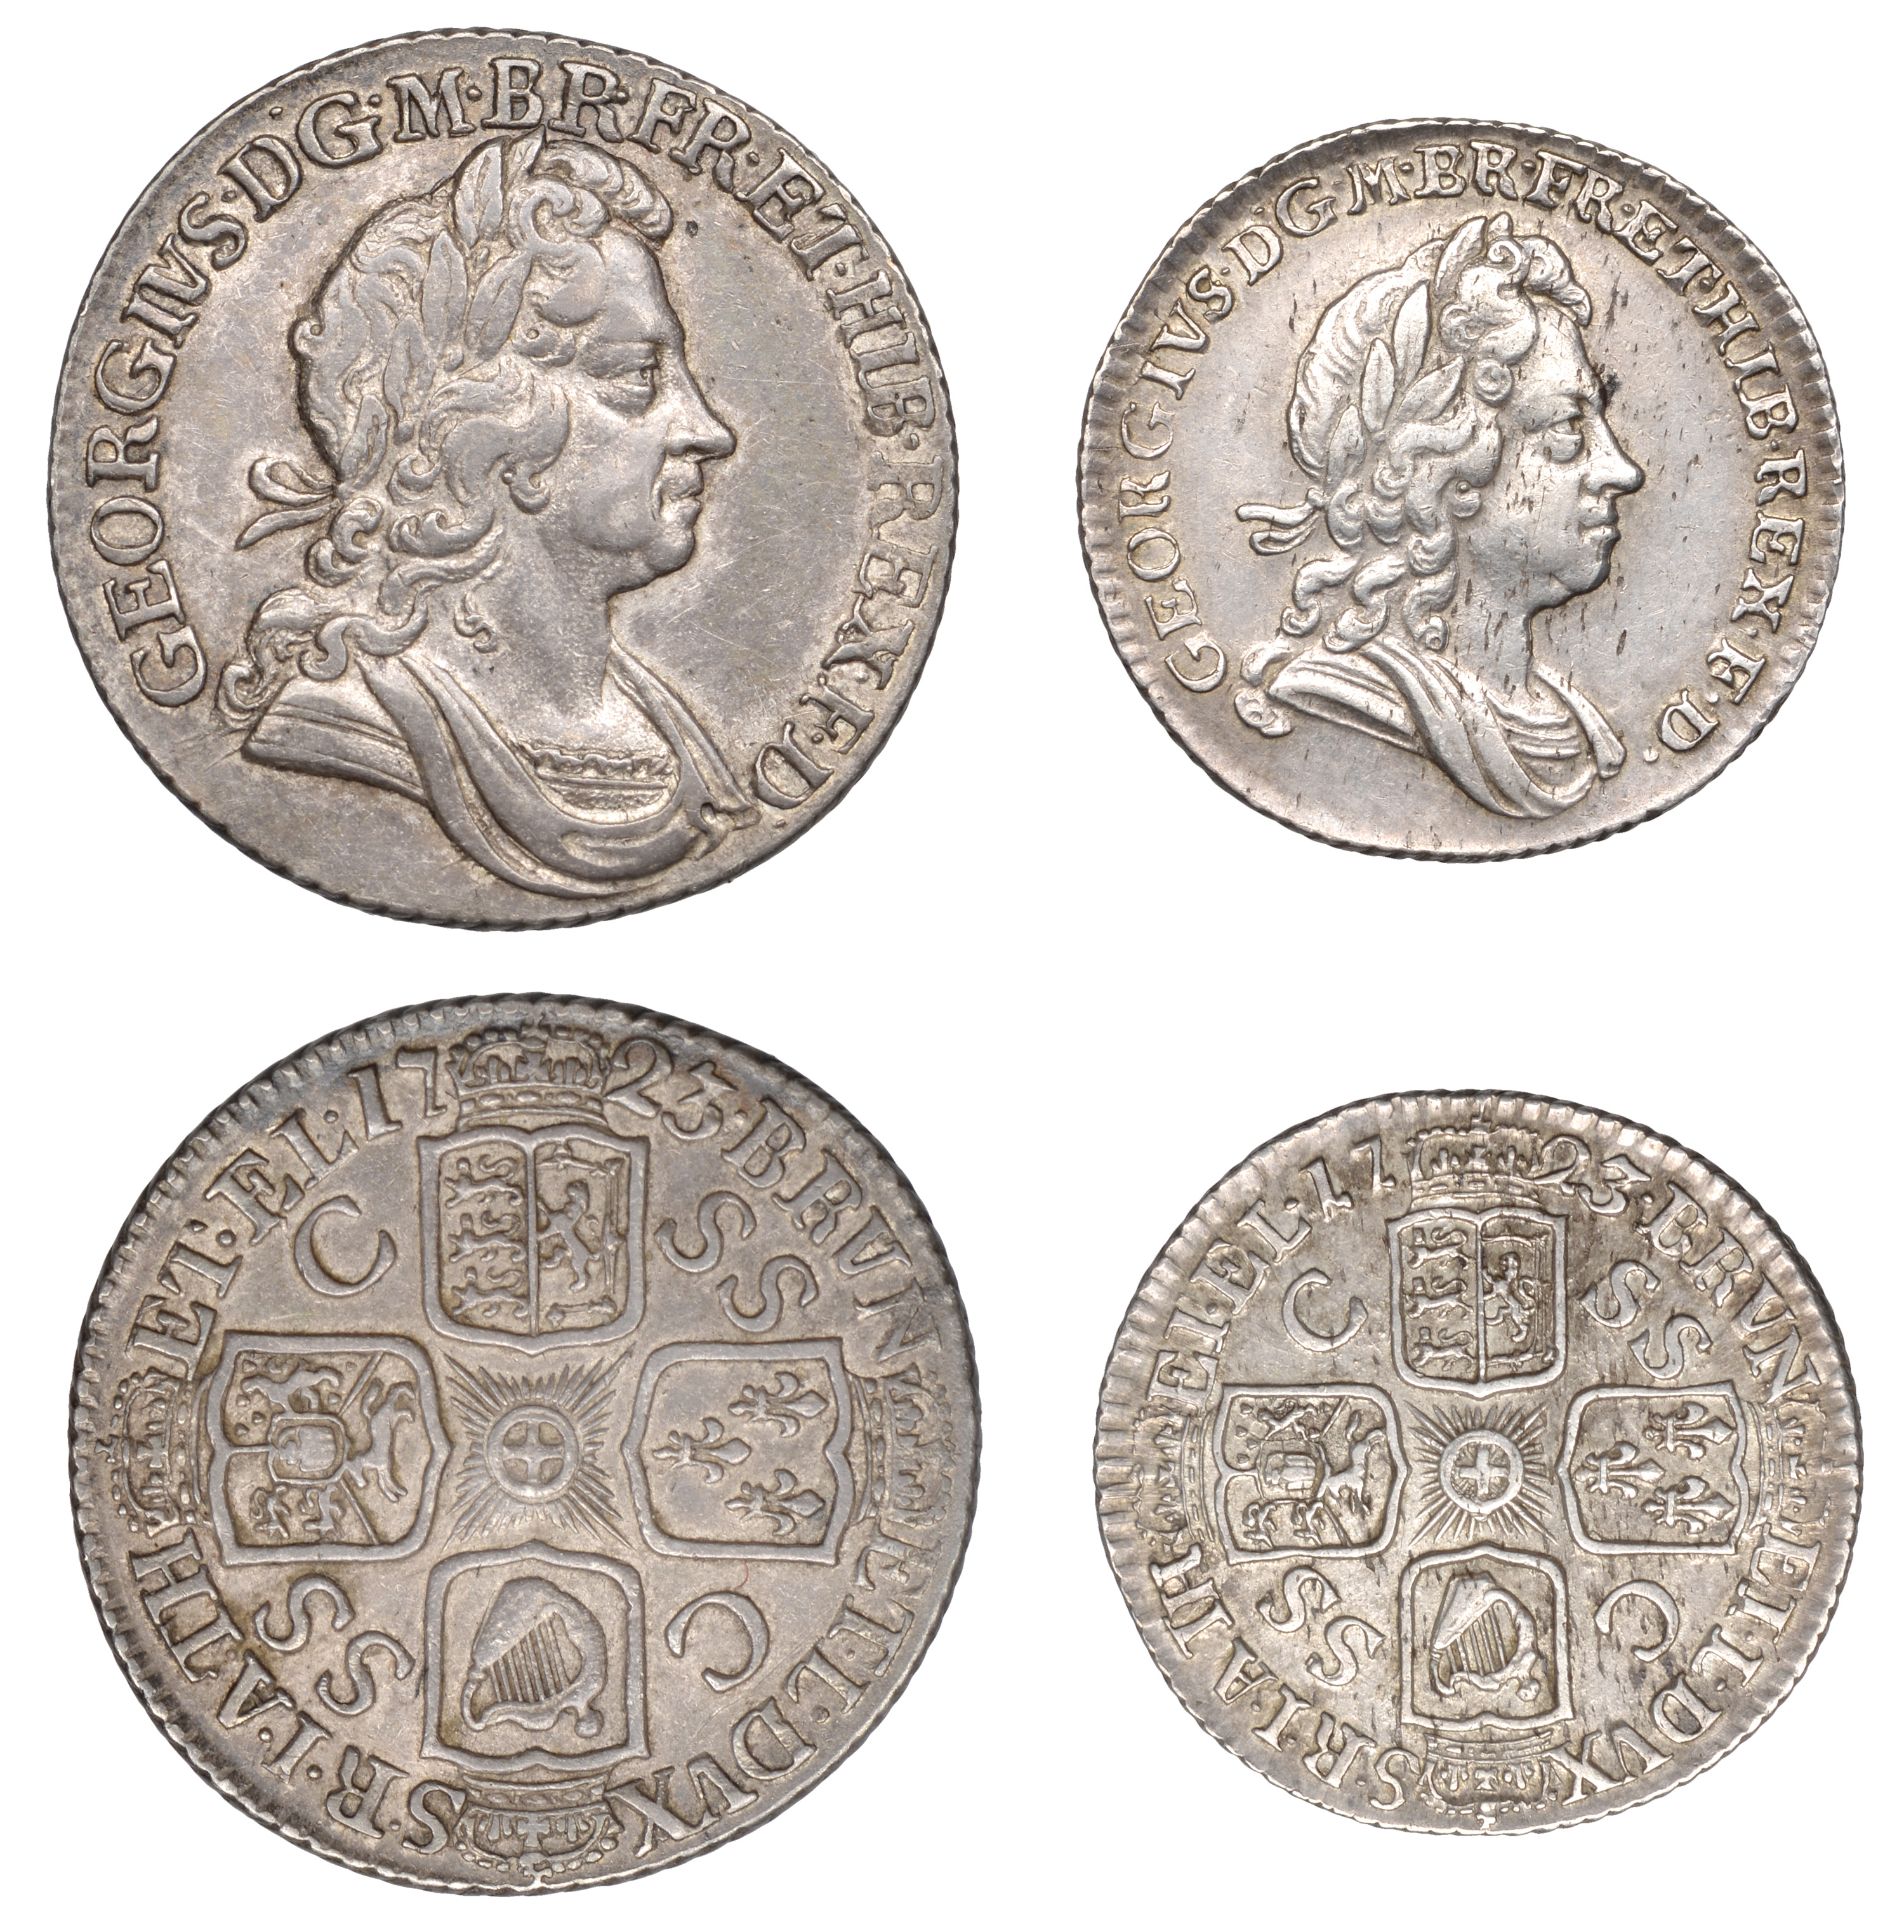 George I, Shilling and Sixpence, 1723 ssc (S 3648, 3652) [2]. Very fine and better Â£100-Â£150